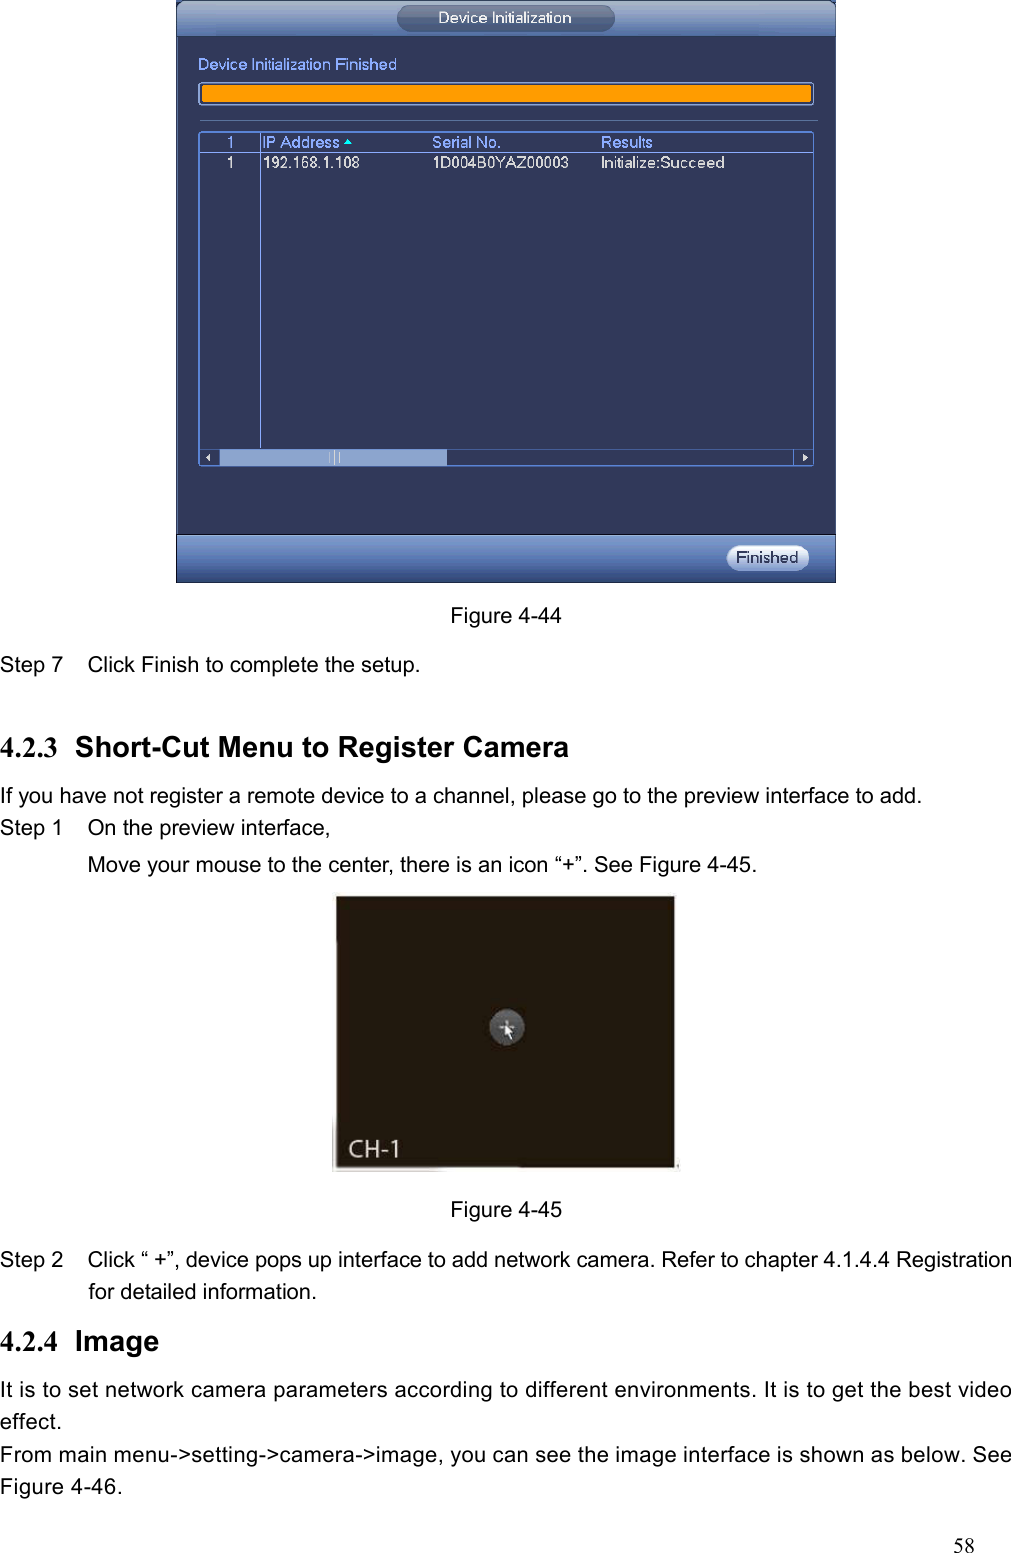 58   Figure 4-44 Step 7  Click Finish to complete the setup.    4.2.3  Short-Cut Menu to Register Camera     If you have not register a remote device to a channel, please go to the preview interface to add.   Step 1  On the preview interface, Move your mouse to the center, there is an icon “+”. See Figure 4-45.  Figure 4-45 Step 2  Click “ +”, device pops up interface to add network camera. Refer to chapter 4.1.4.4 Registration for detailed information.   4.2.4  Image It is to set network camera parameters according to different environments. It is to get the best video effect.   From main menu-&gt;setting-&gt;camera-&gt;image, you can see the image interface is shown as below. See Figure 4-46. 